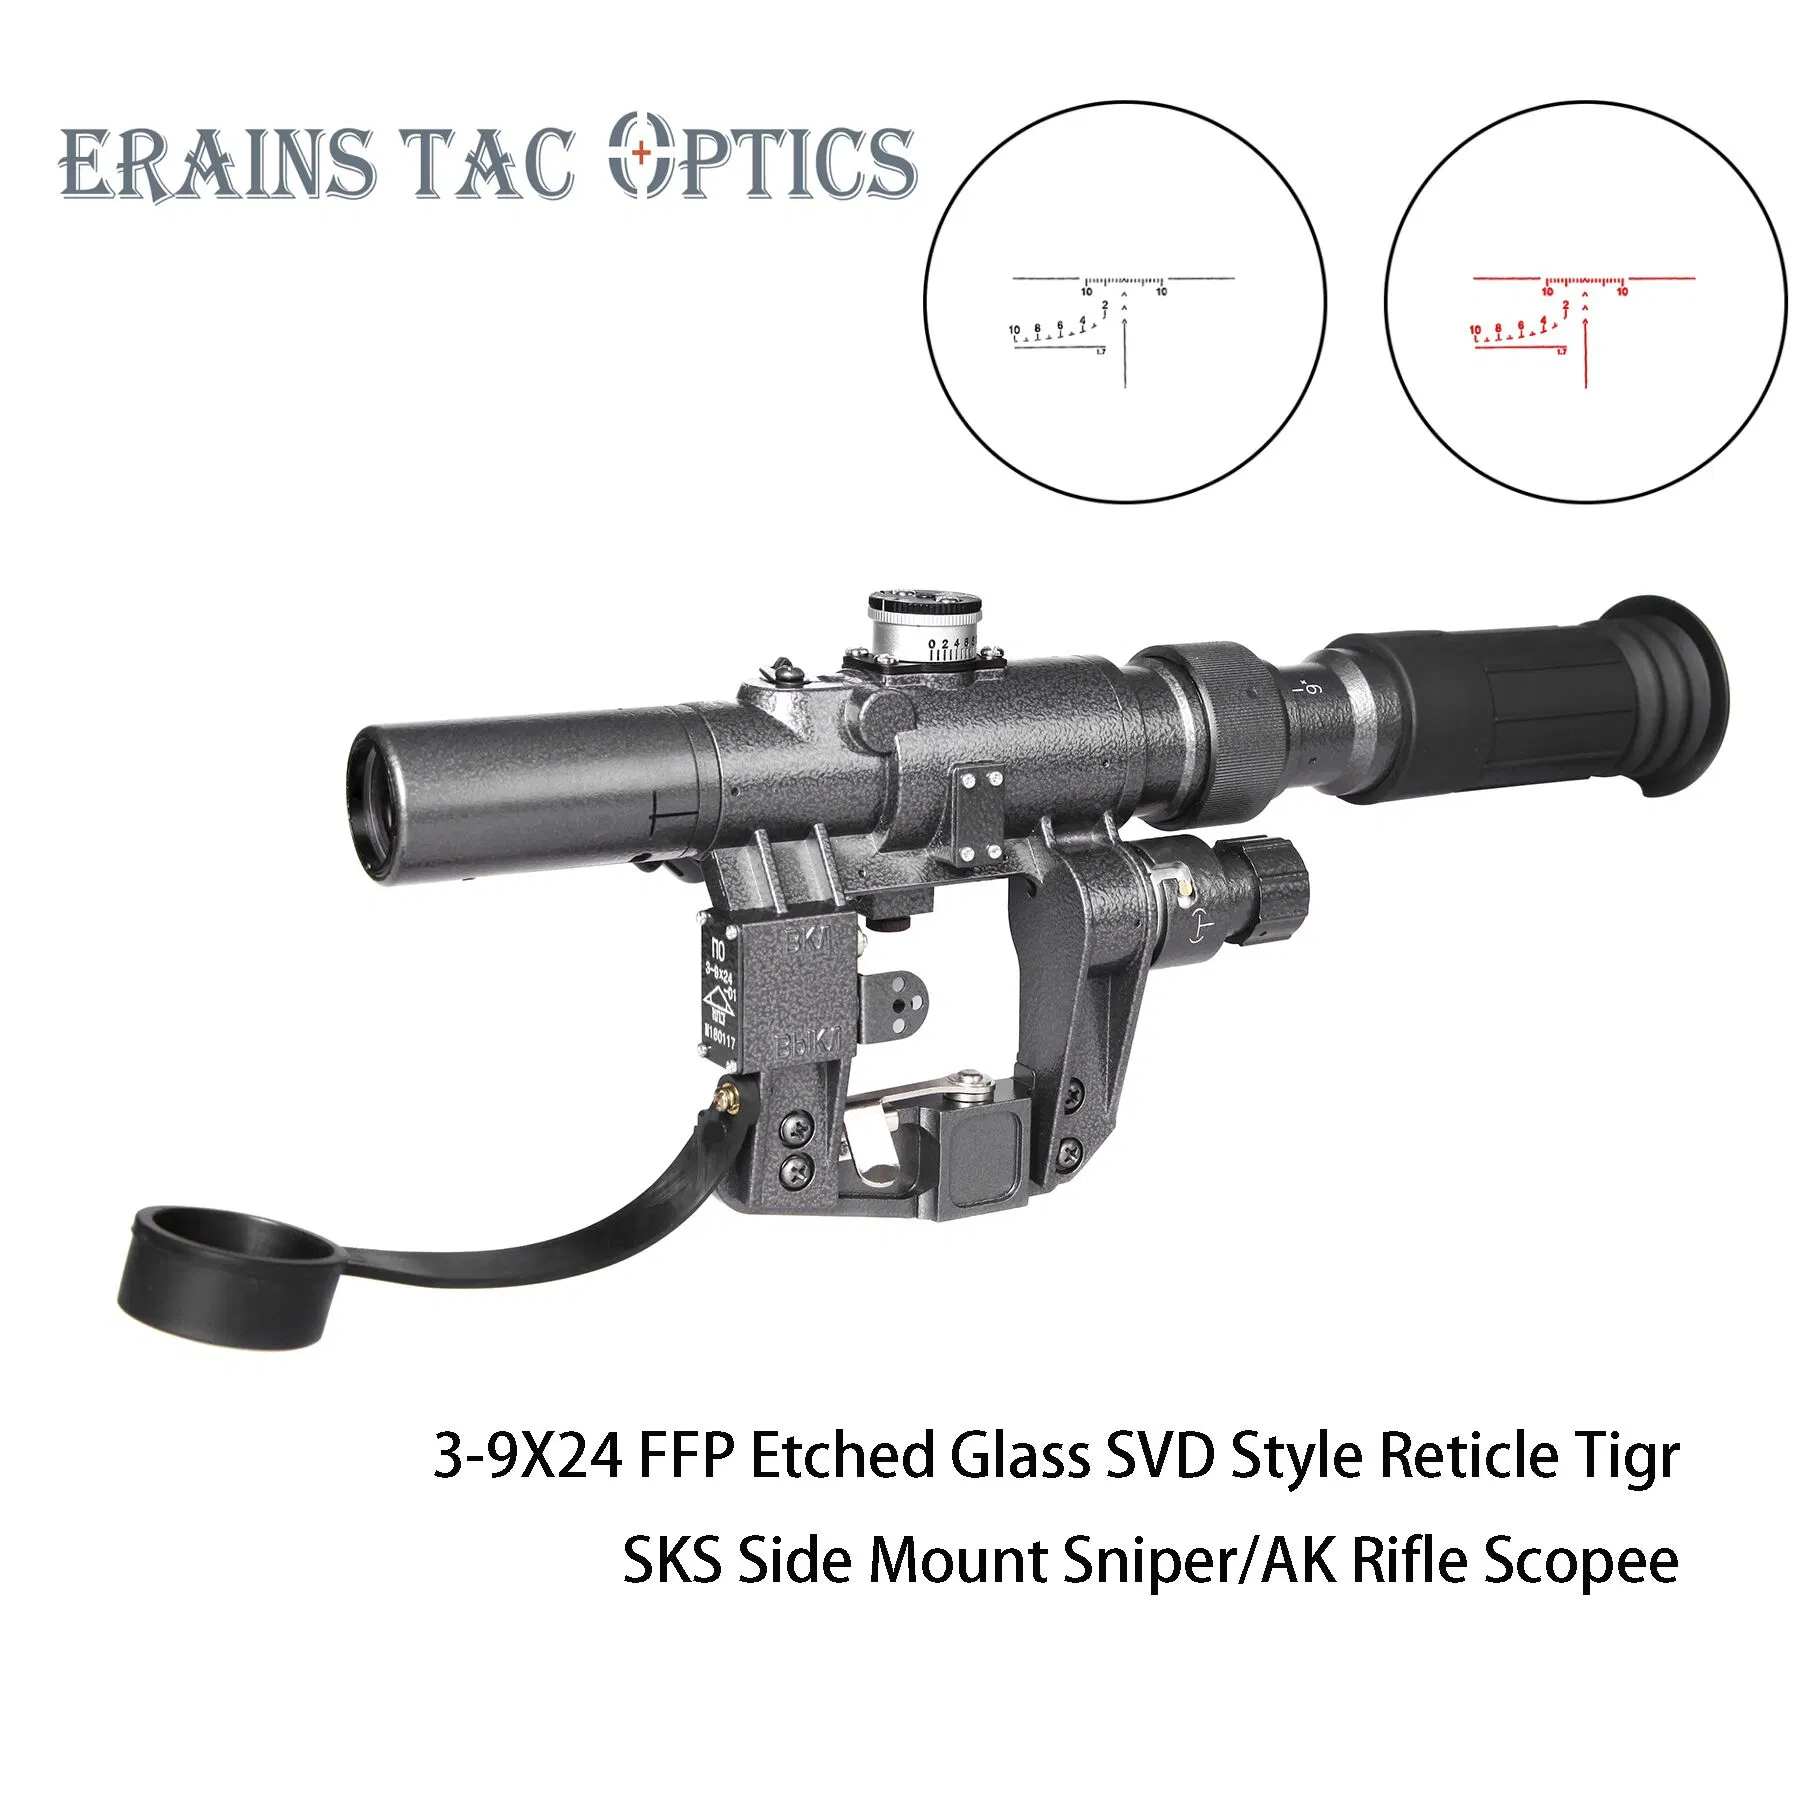 Draguno Gun Scope with Svd 3-9X24 First Focal Plane Red Illuminated Reticle Weapon Scope Hunting Sniper Weapon Sight